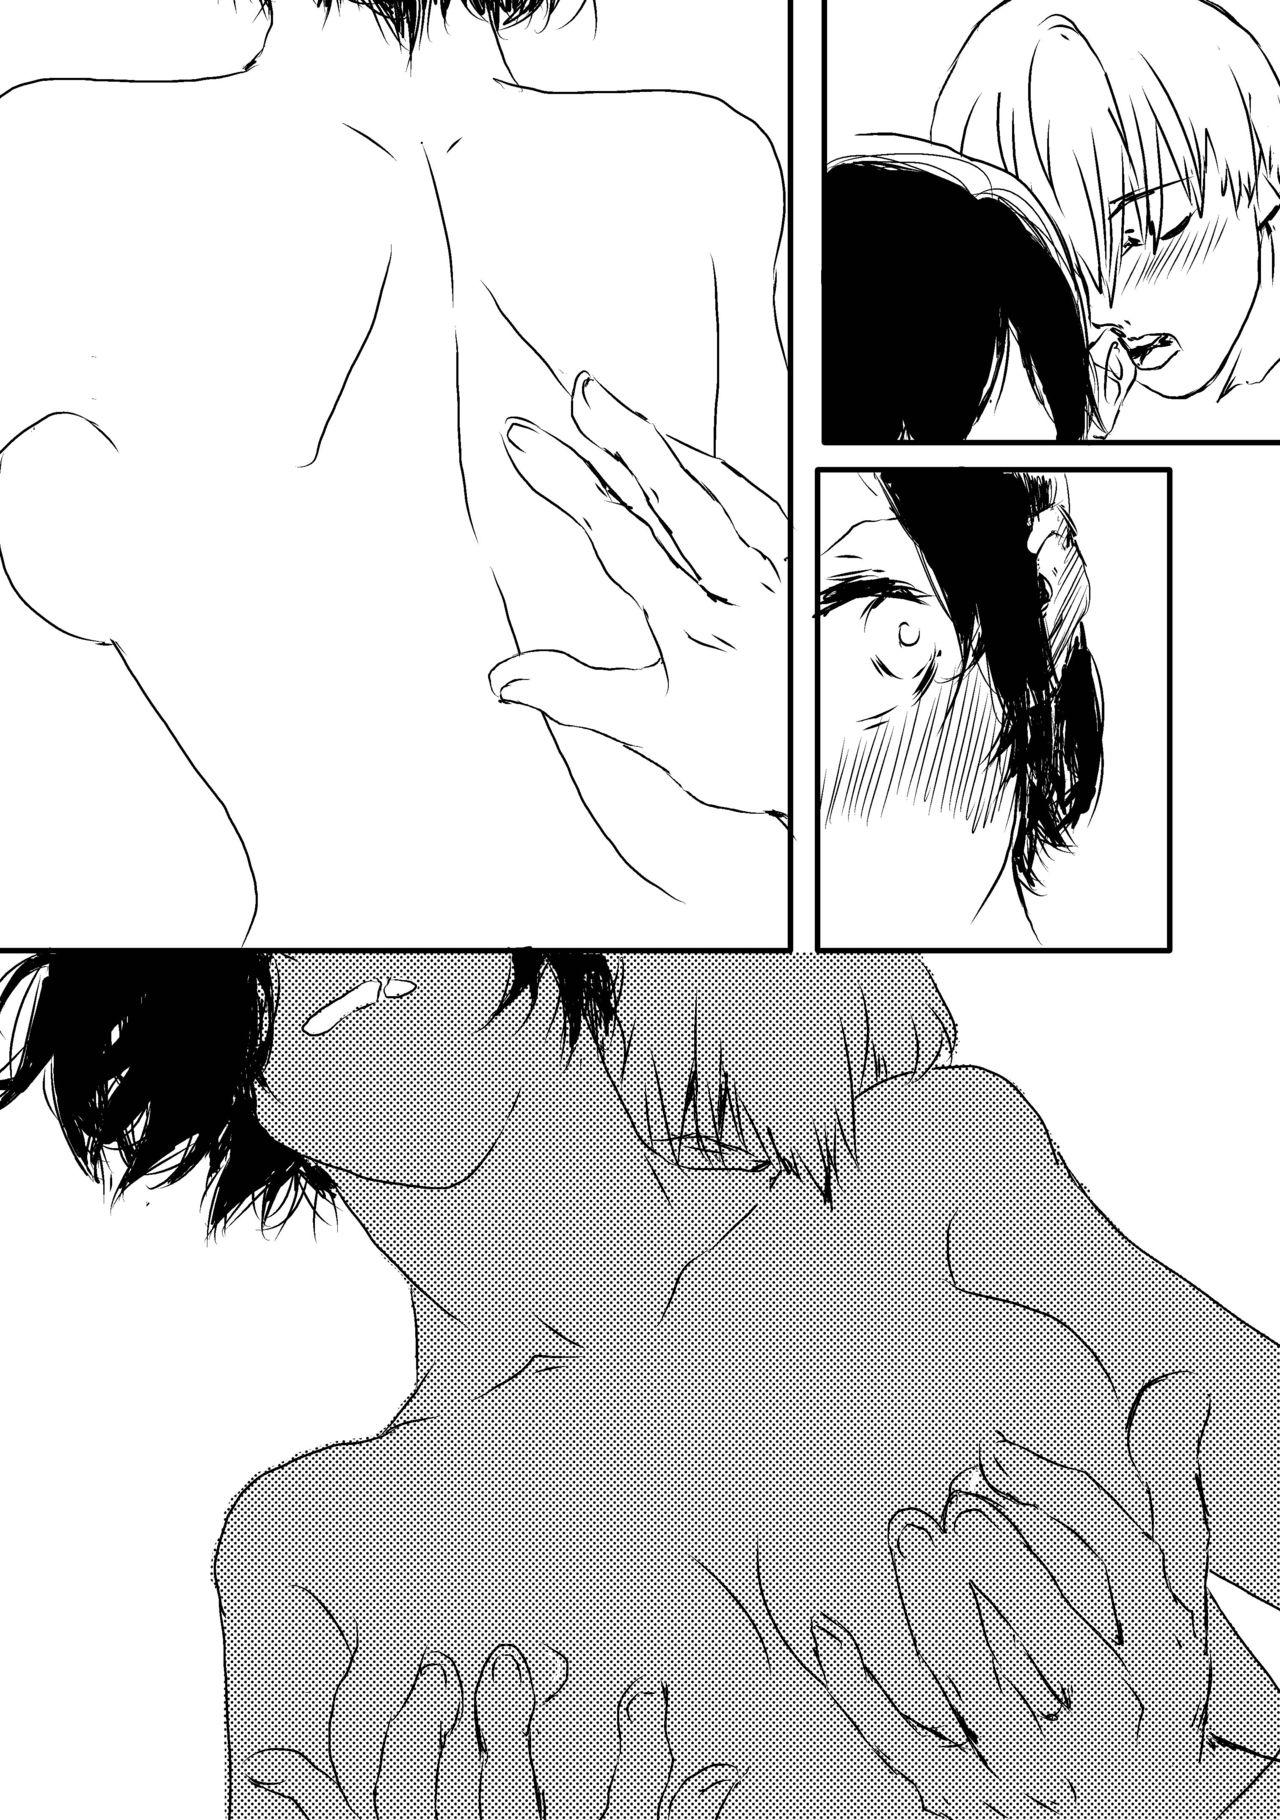 Erotic Melt - Tokyo ghoul Mexican - Page 13